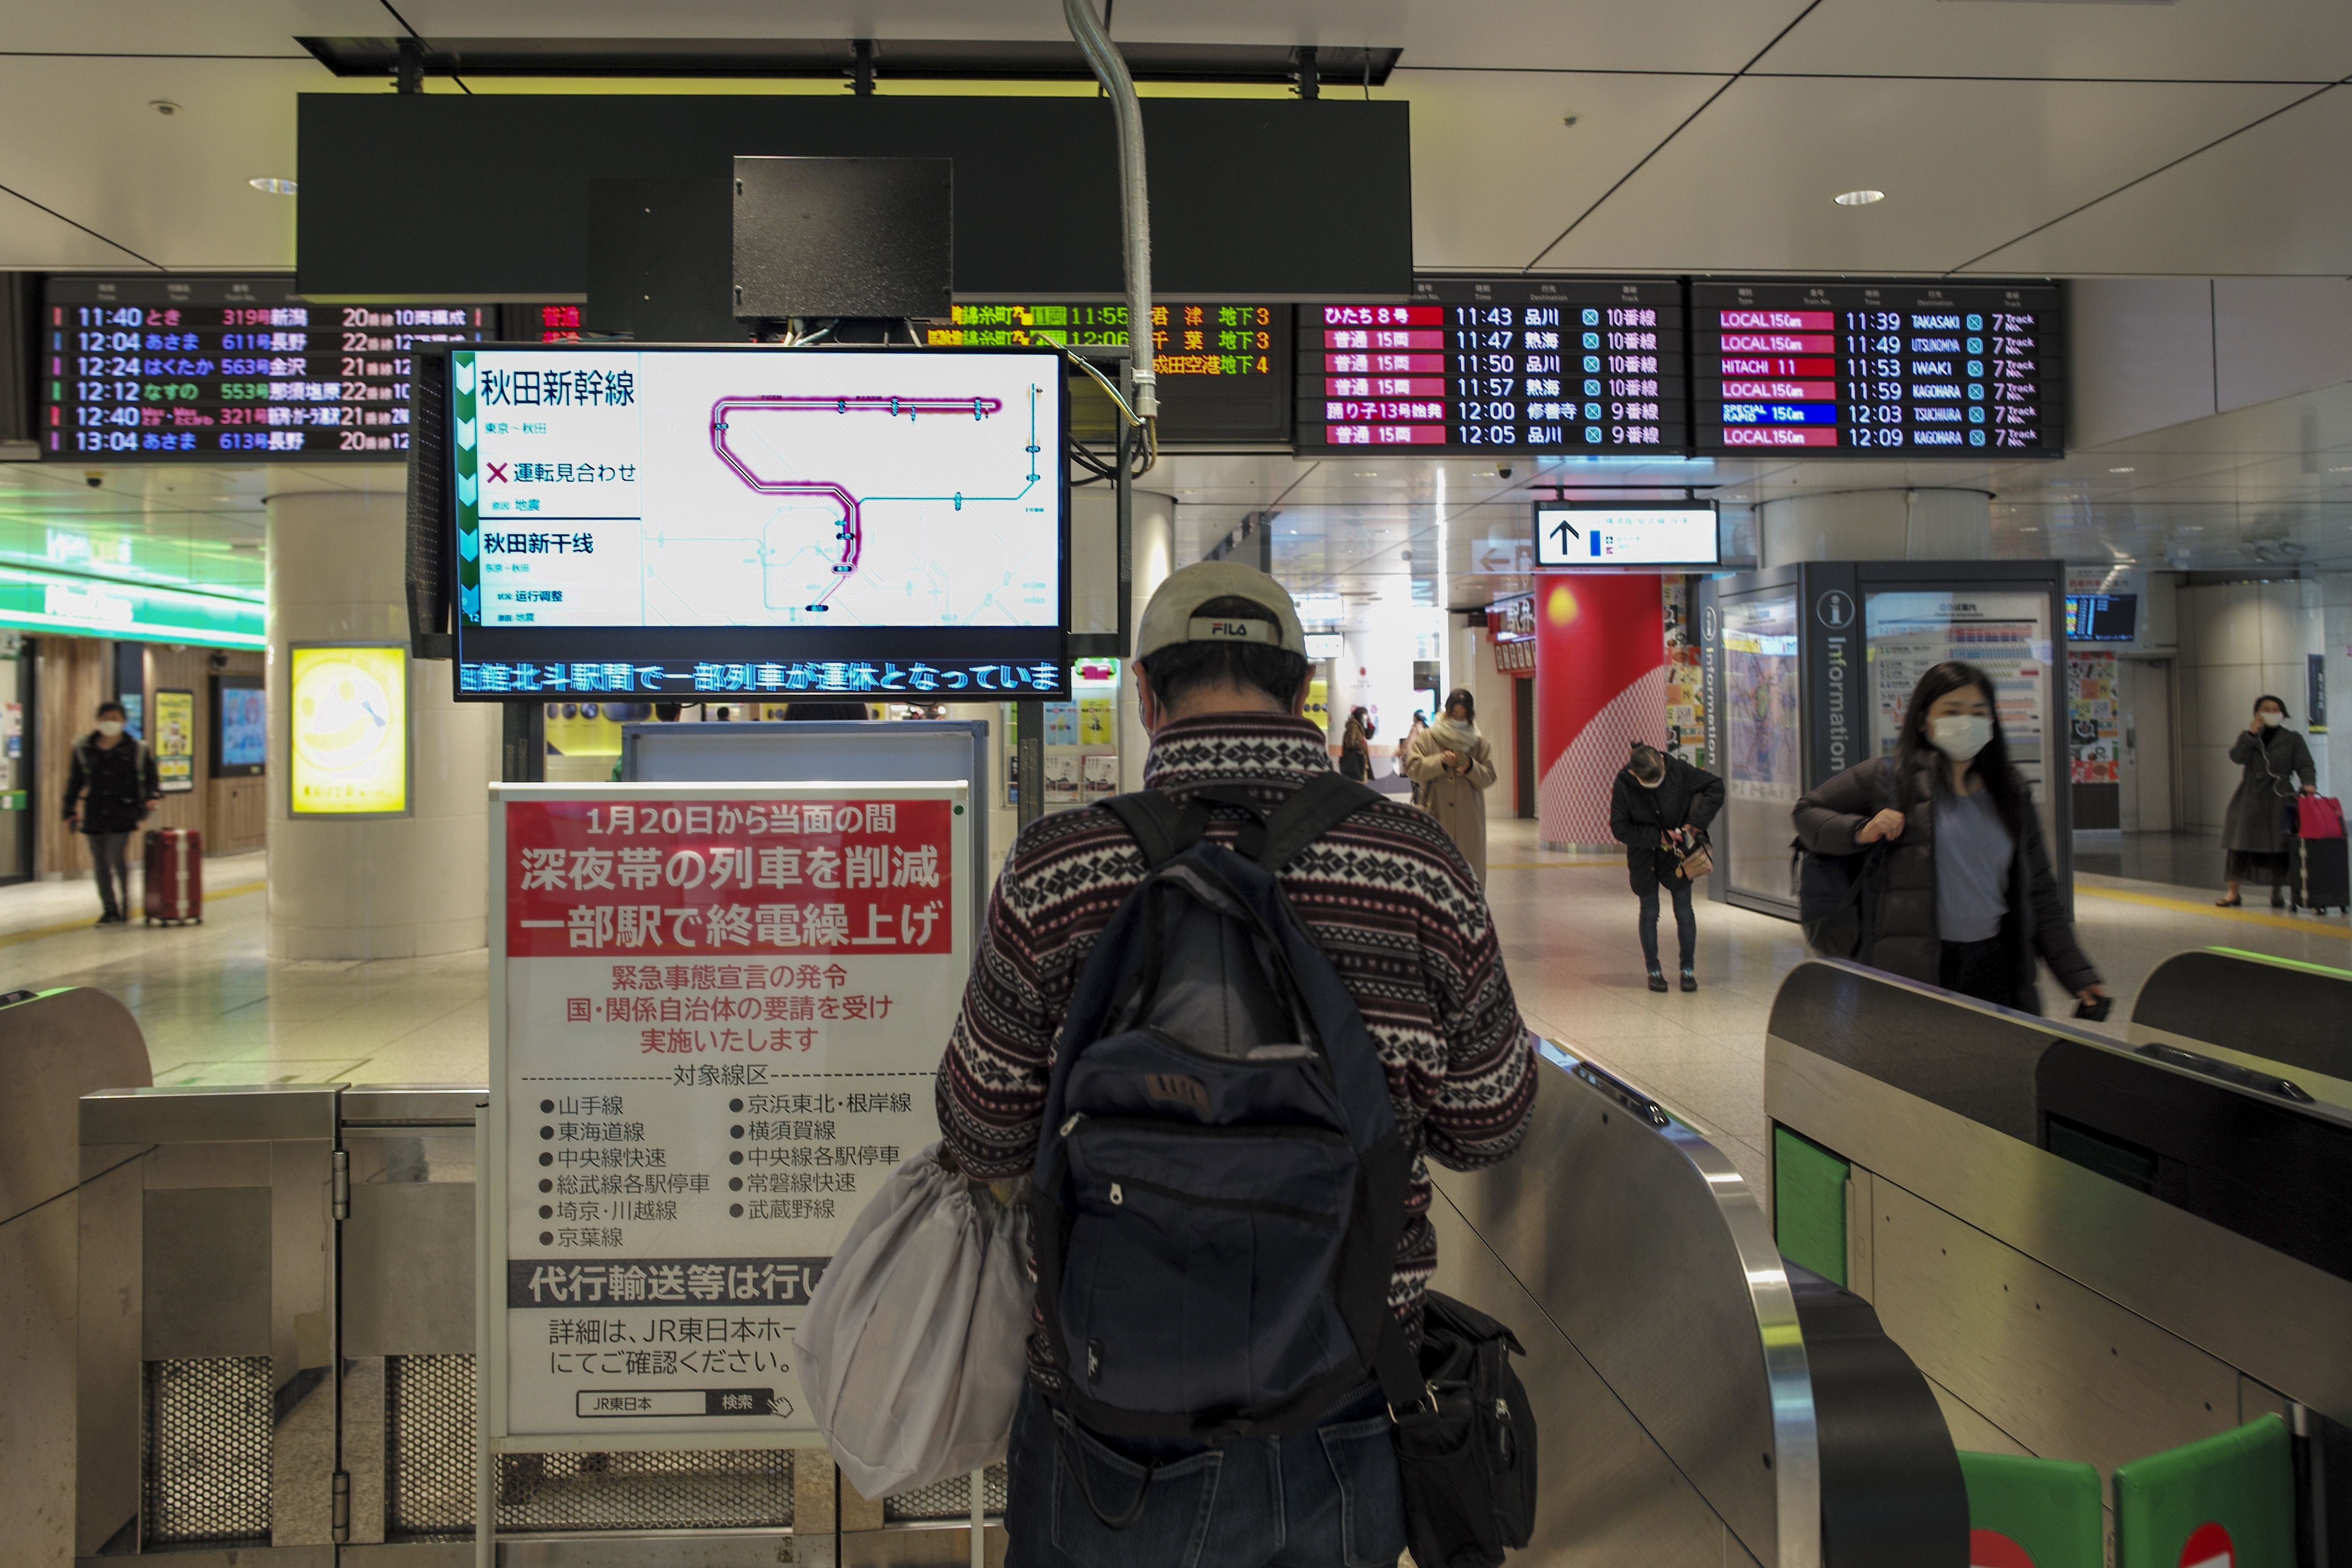 Screens display the suspenion of operations of the Shinkansen bullet train in the Tohoku region at JR Tokyo Station in Tokyo on February 14